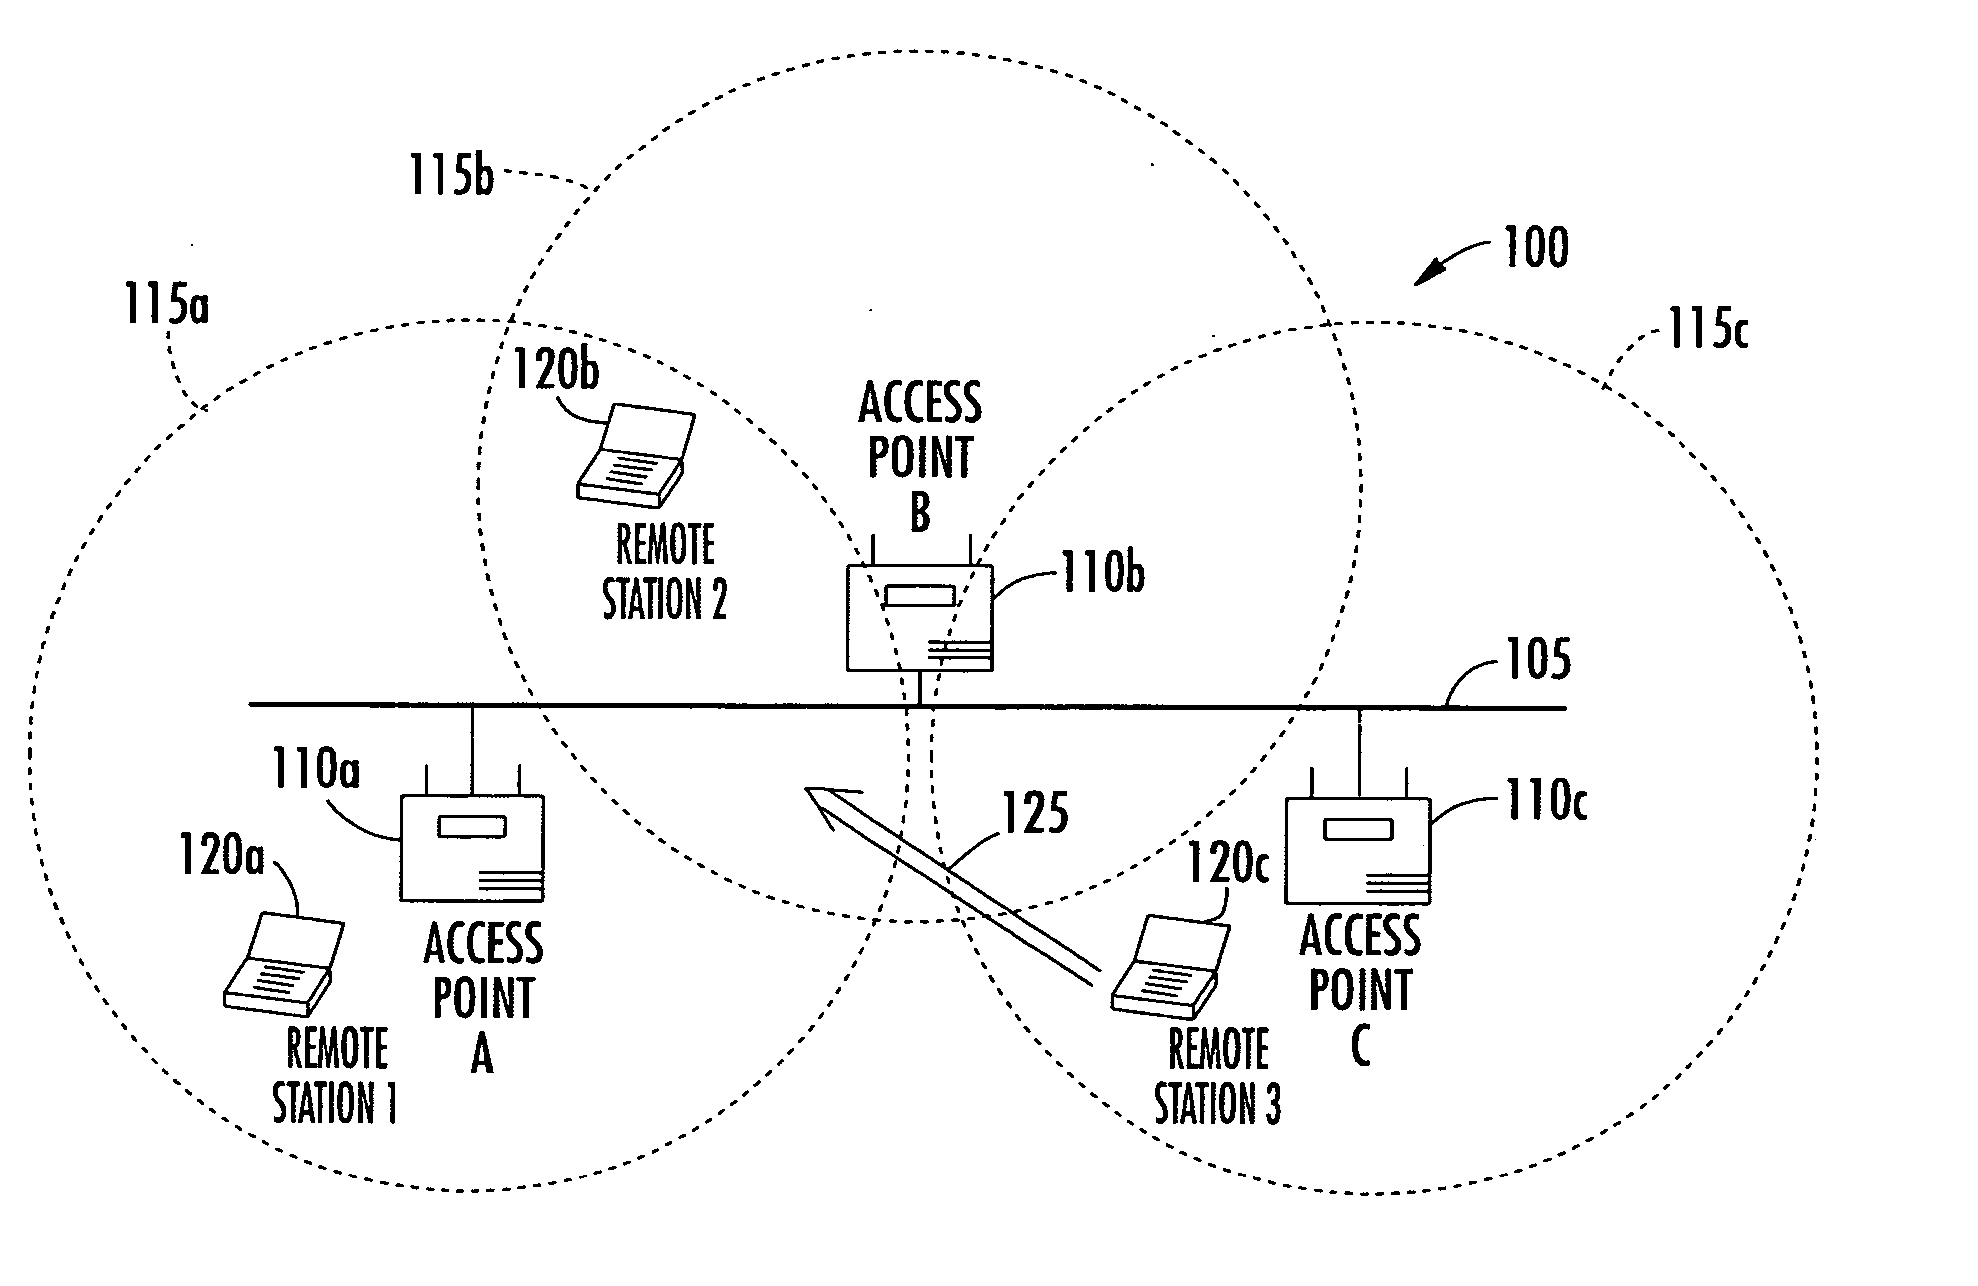 Antenna steering for an access point based upon control frames